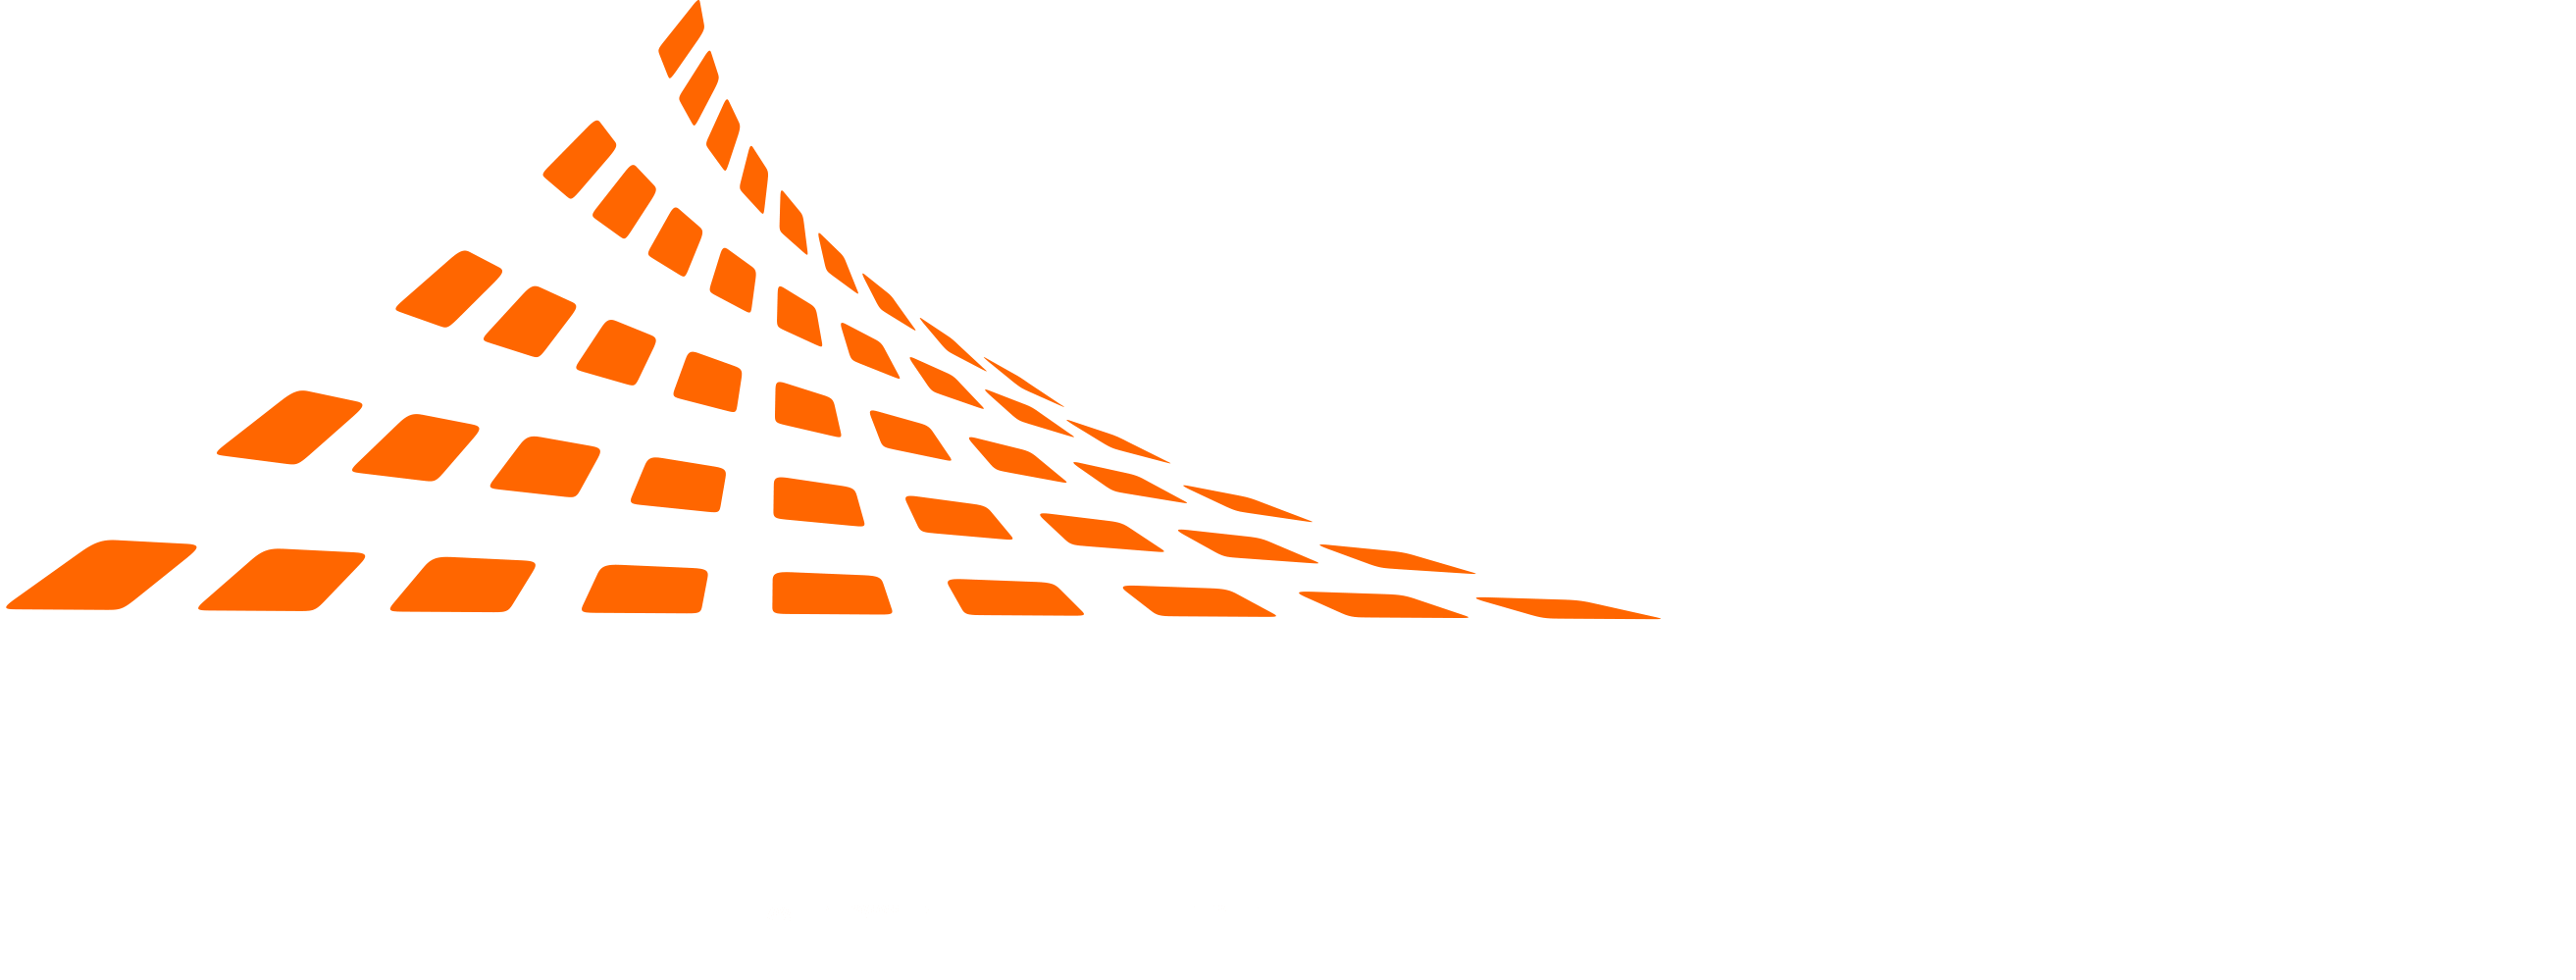 Nerepis Has Been Selected By Dreamhack For The Game - Dreamhack Winter 2018 Logo (2626x999)